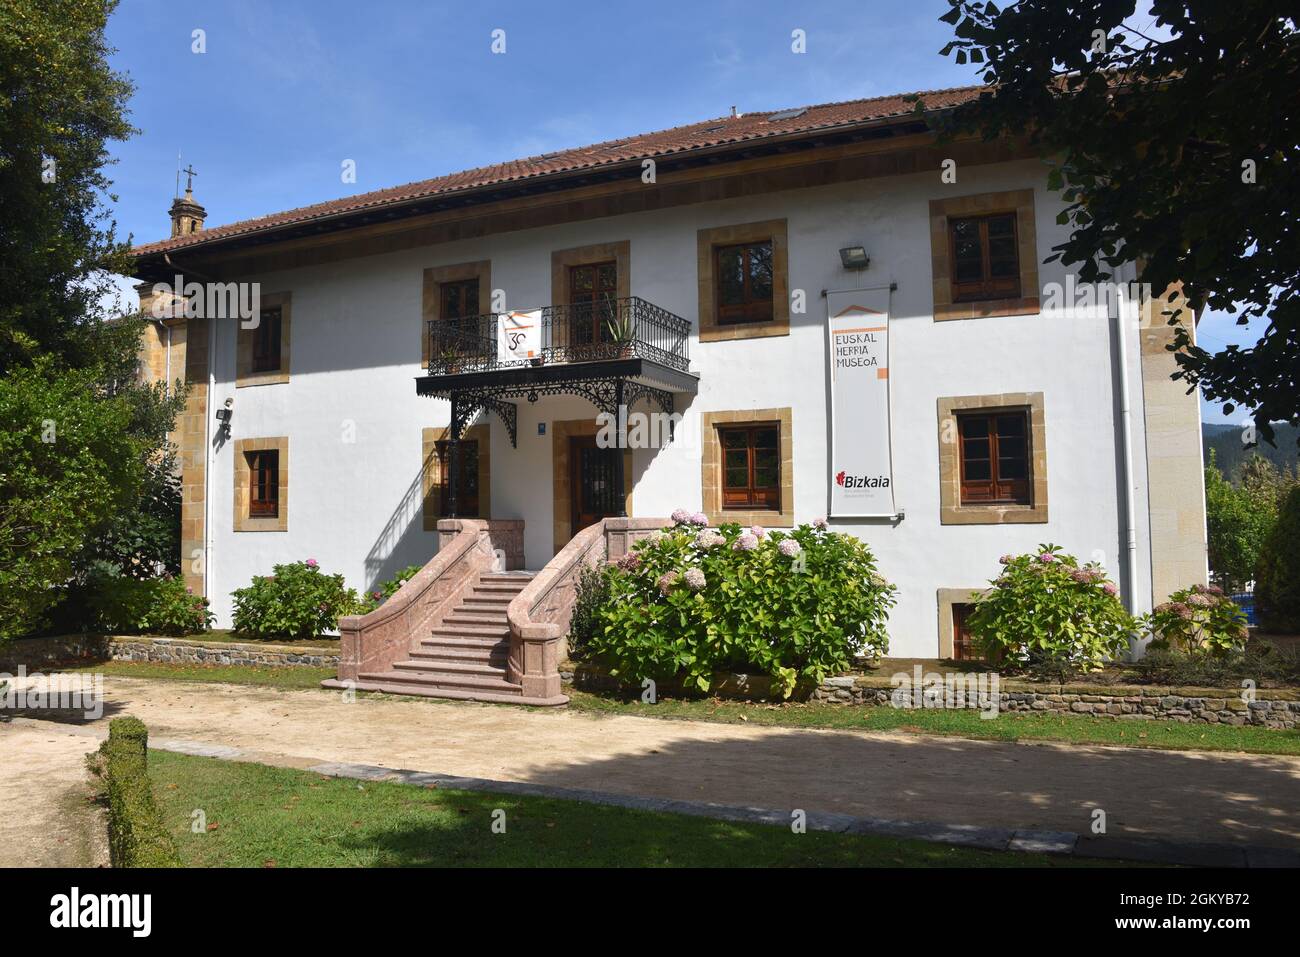 Guernica, Spain - 11 Sept 2021: Museum of the Basque Country, Euskal Herria Museum, in Guernica, Basque Country, Spain Stock Photo